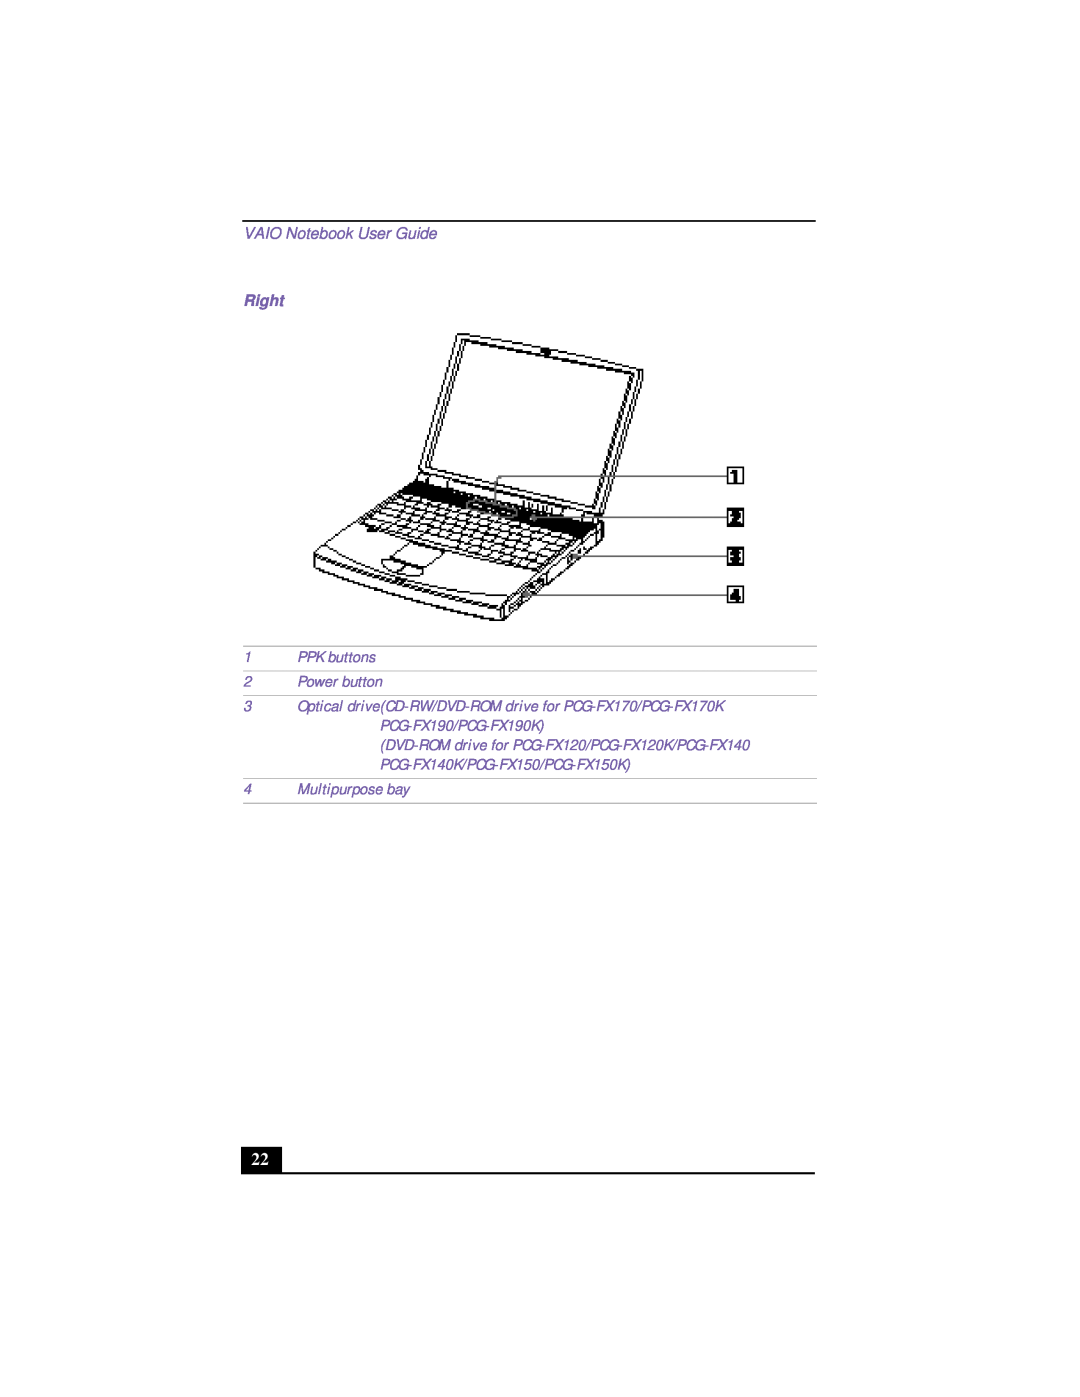 Sony PCG-FX120 manual VAIO Notebook User Guide, Right 1 PPK buttons 2 Power button, Multipurpose bay 